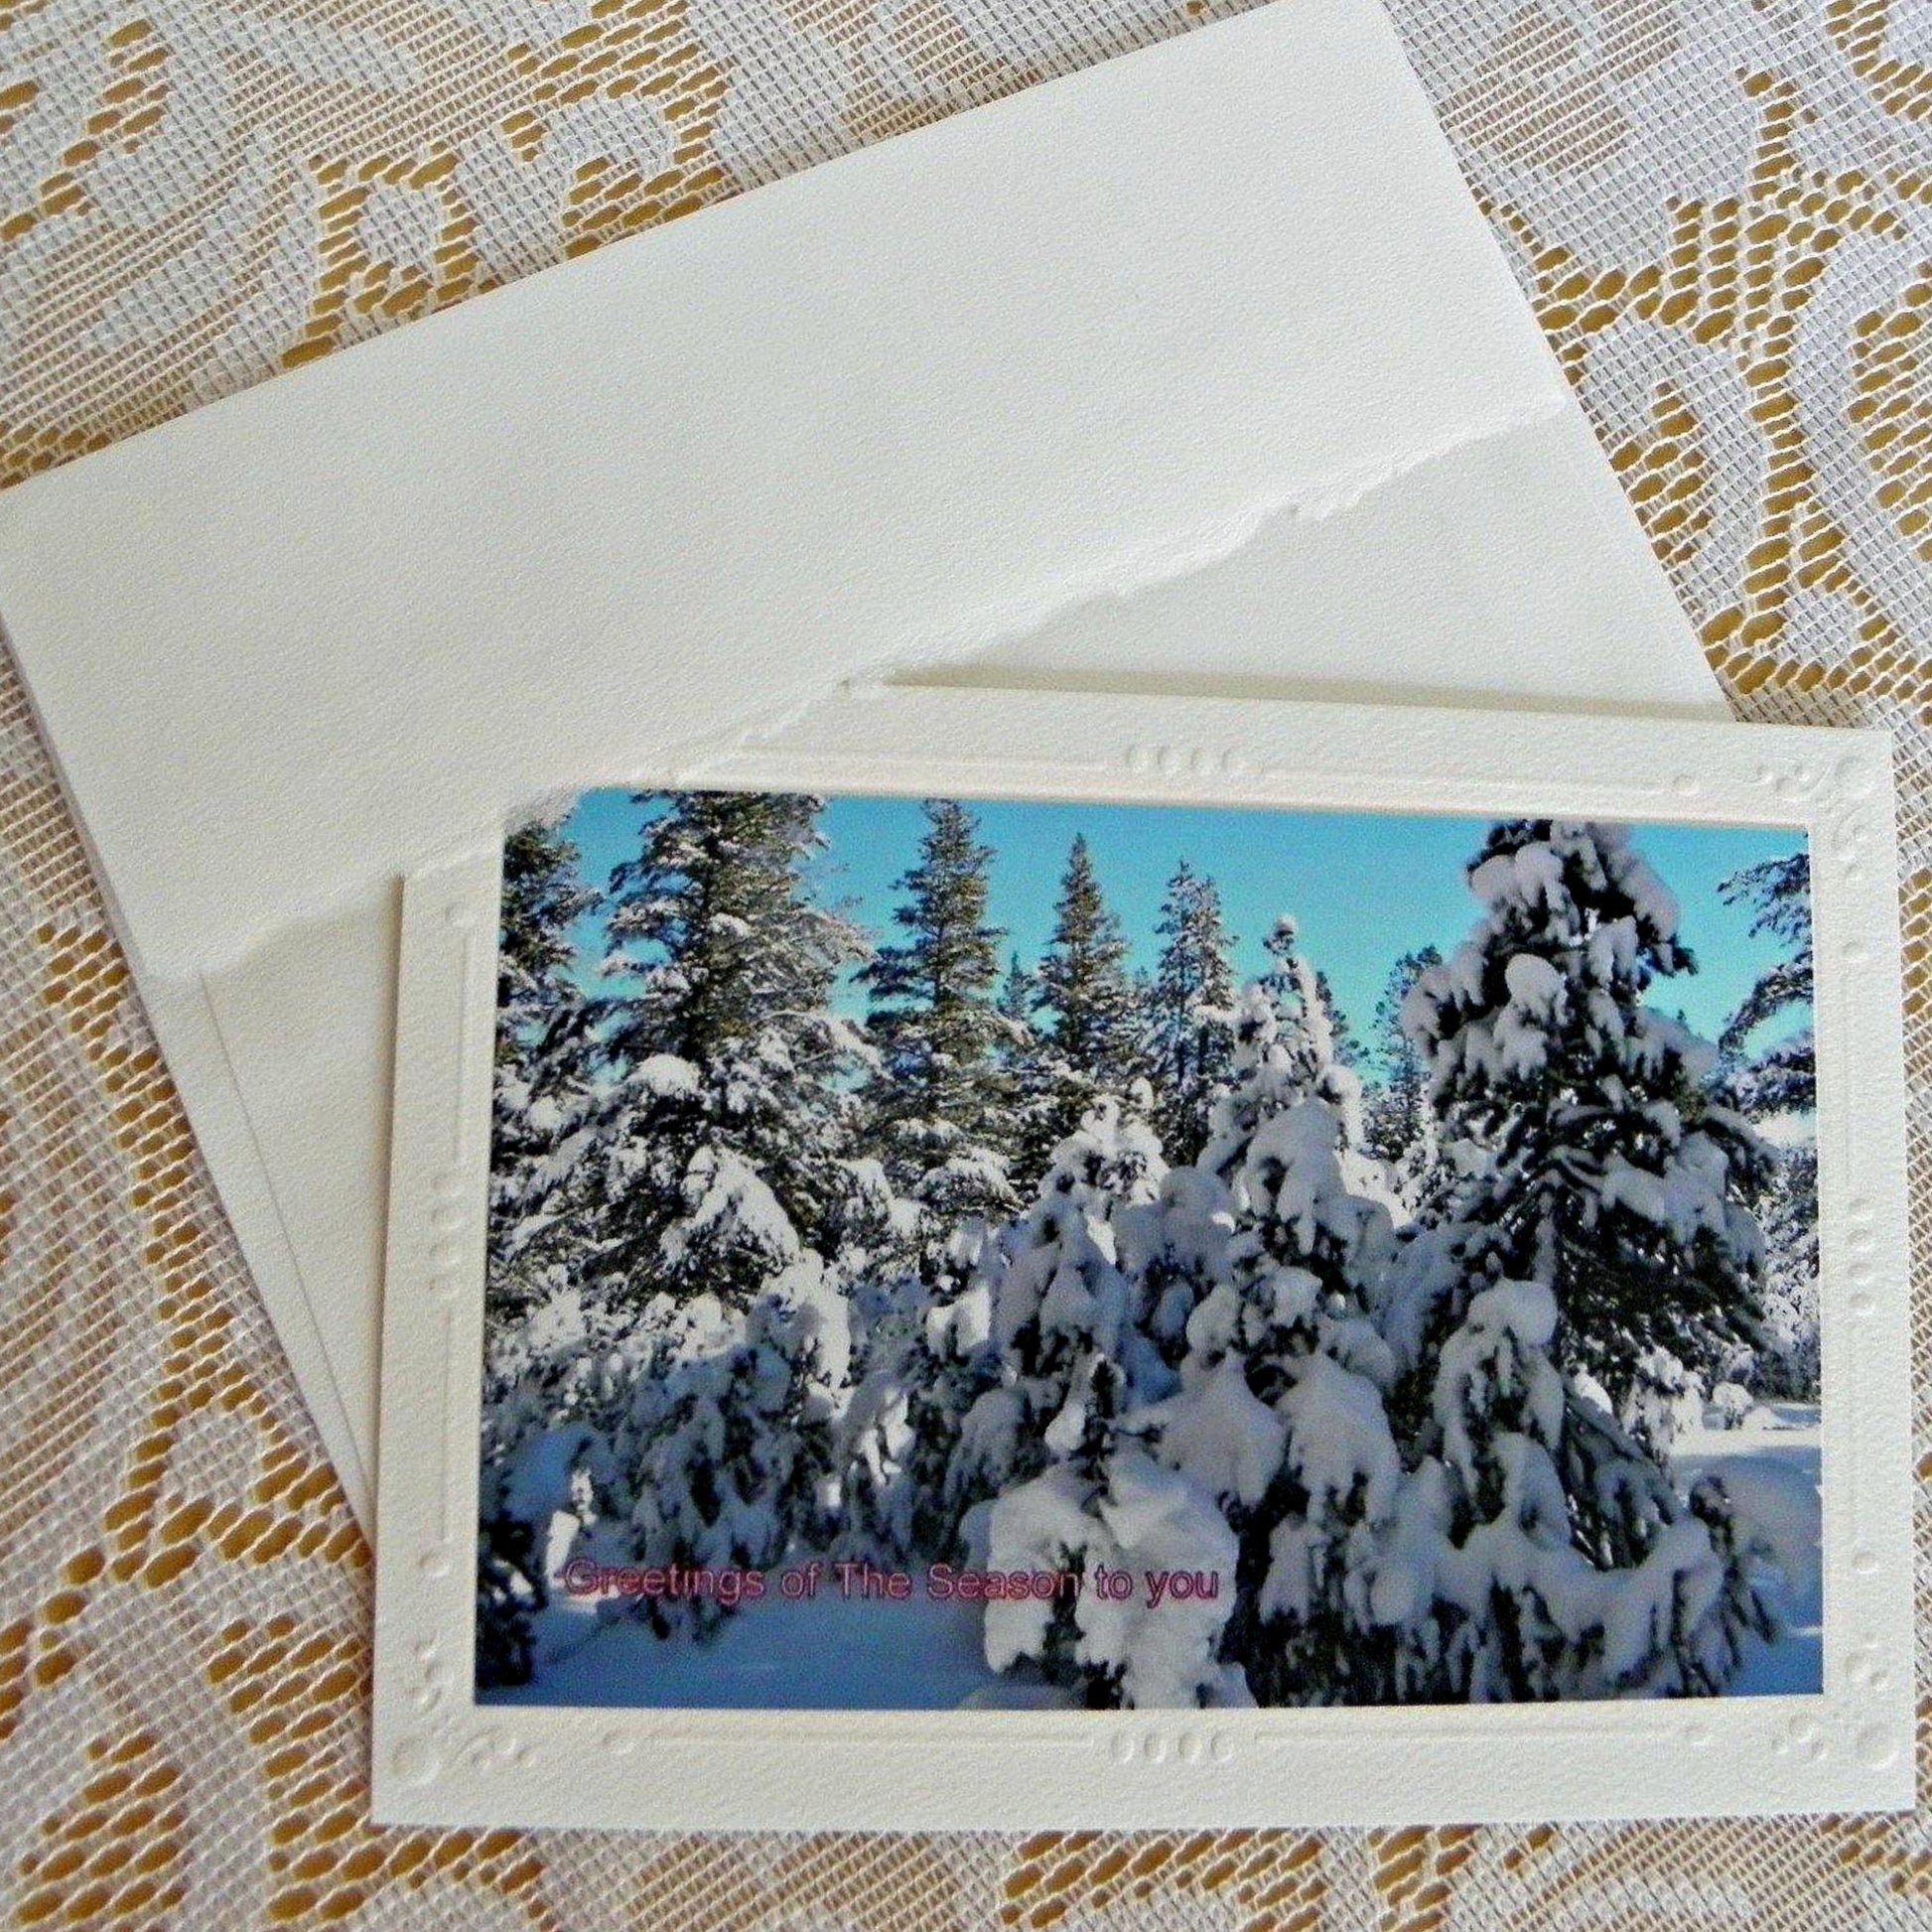 Greetings of The Season to you card and envelope